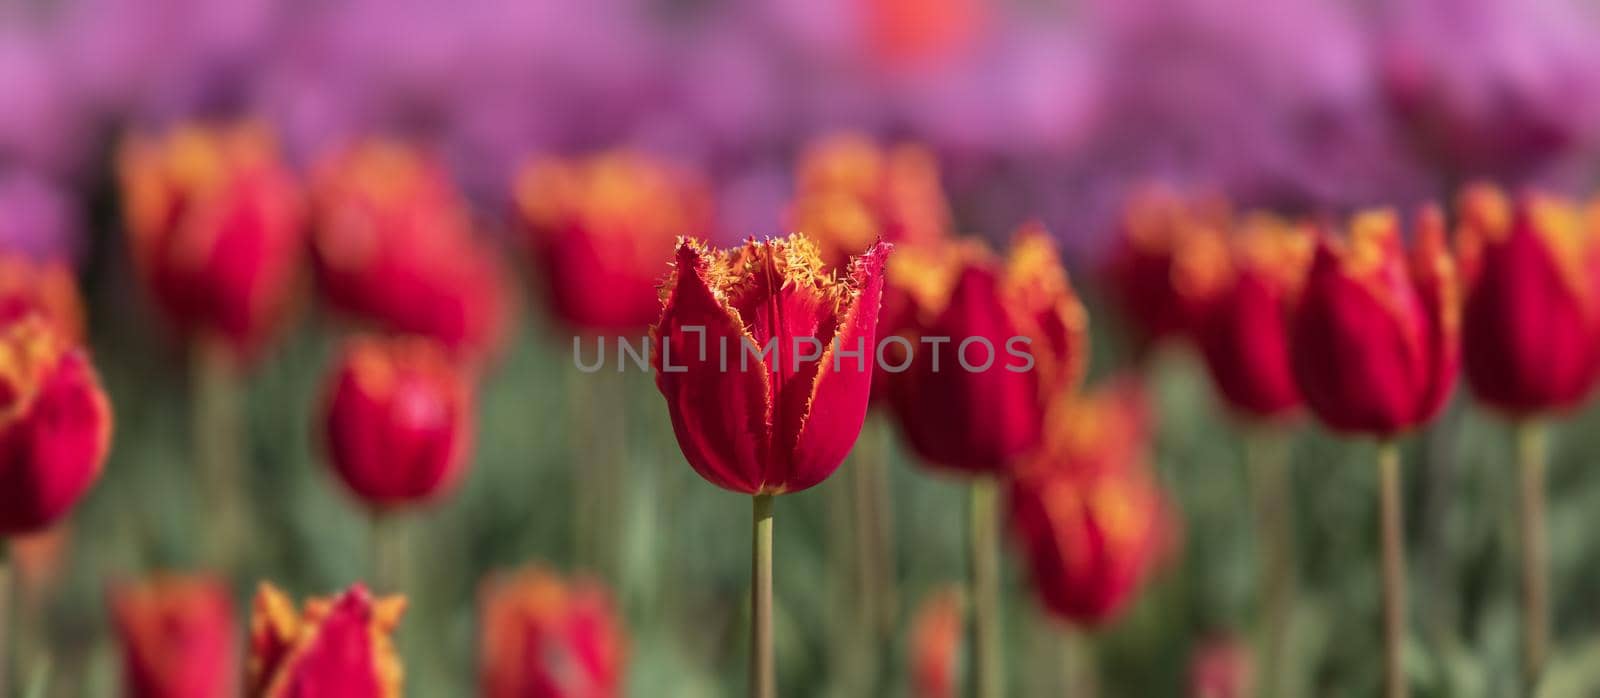 Tulips in the city by palinchak